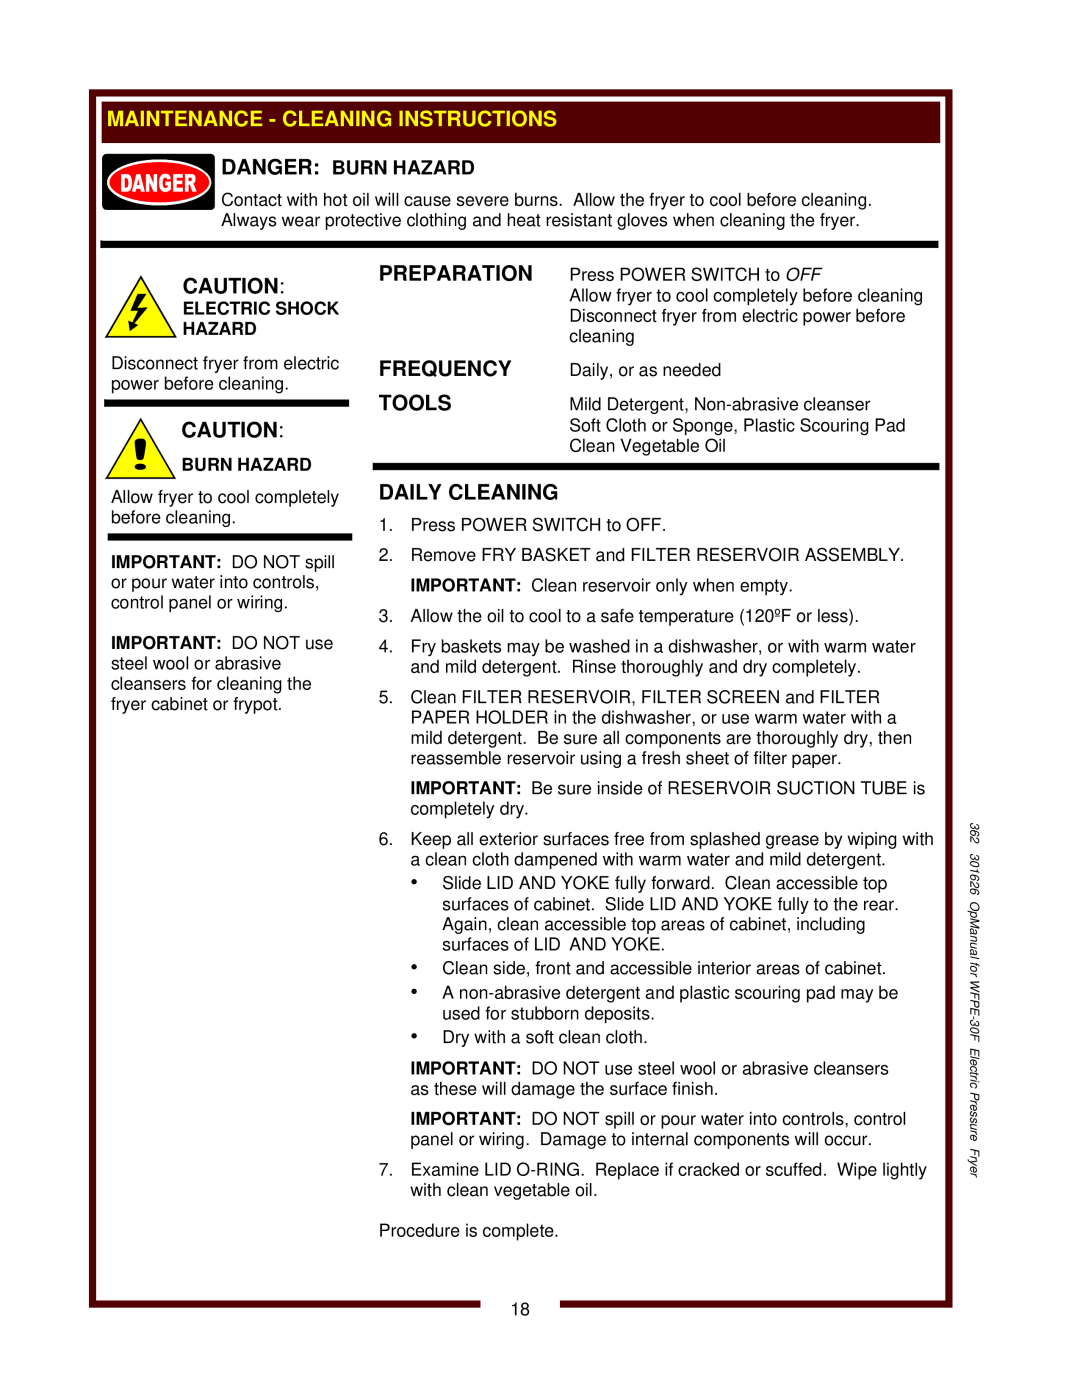 Wells WFPE-30F Maintenance - Cleaning Instructions, Preparation, Frequency, Tools, Daily Cleaning, Danger Burn Hazard 